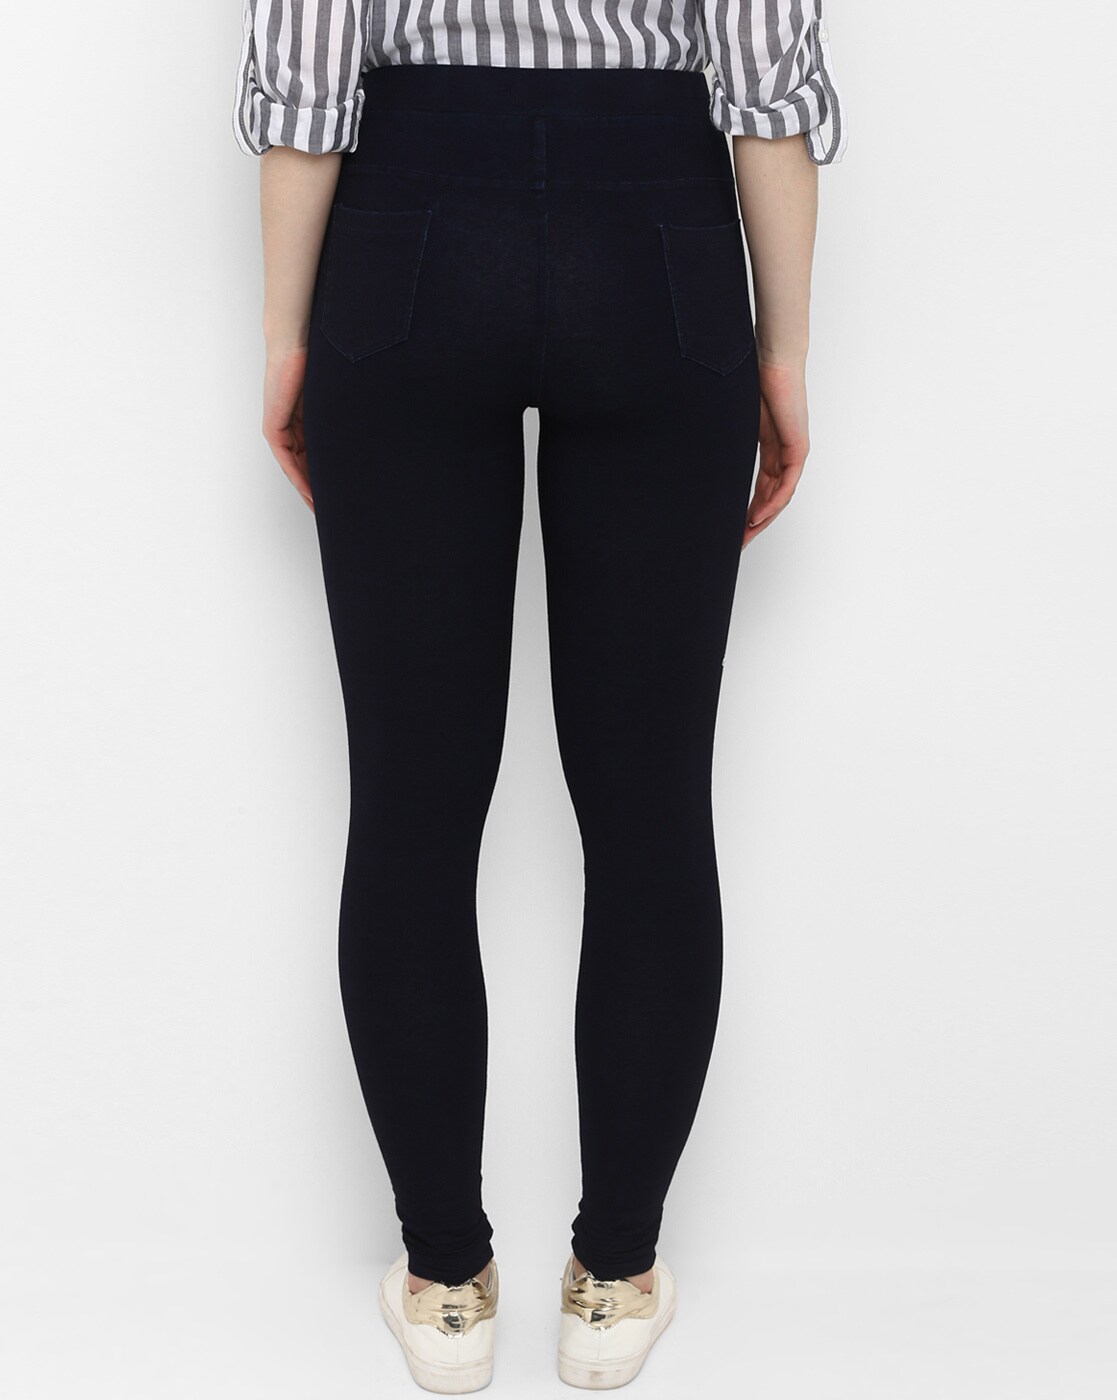 jeggings with front pockets